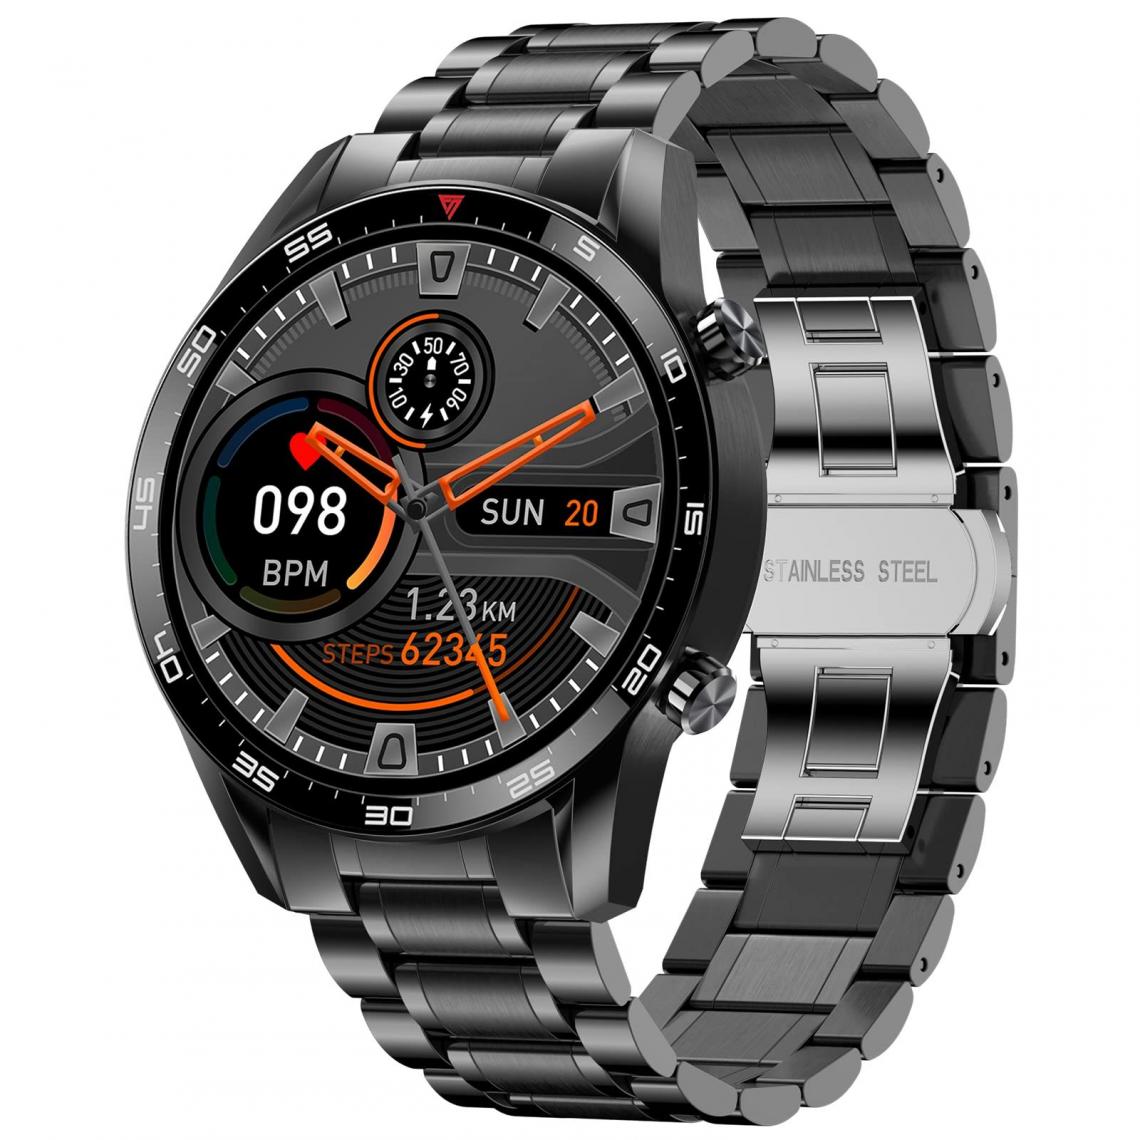 Chronotech Montres - Chronus Smart Watch,1.3 inch Full Touch Screen Fitness Traker with Heart Rate Sleep Monitor IP67 Waterproof Activity Tracker with Bluetooth Call Voice Stainless Steel Band Stopwatch for iOS Android(black) - Montre connectée